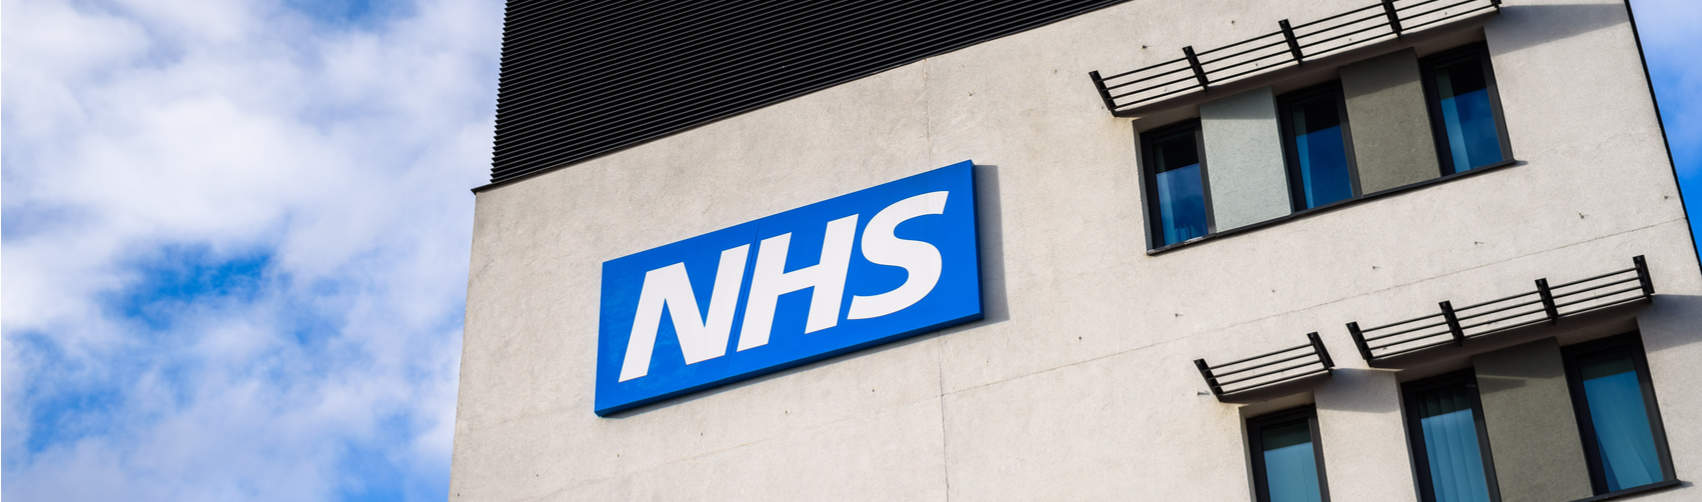 NHS ‘no chance of training enough staff’